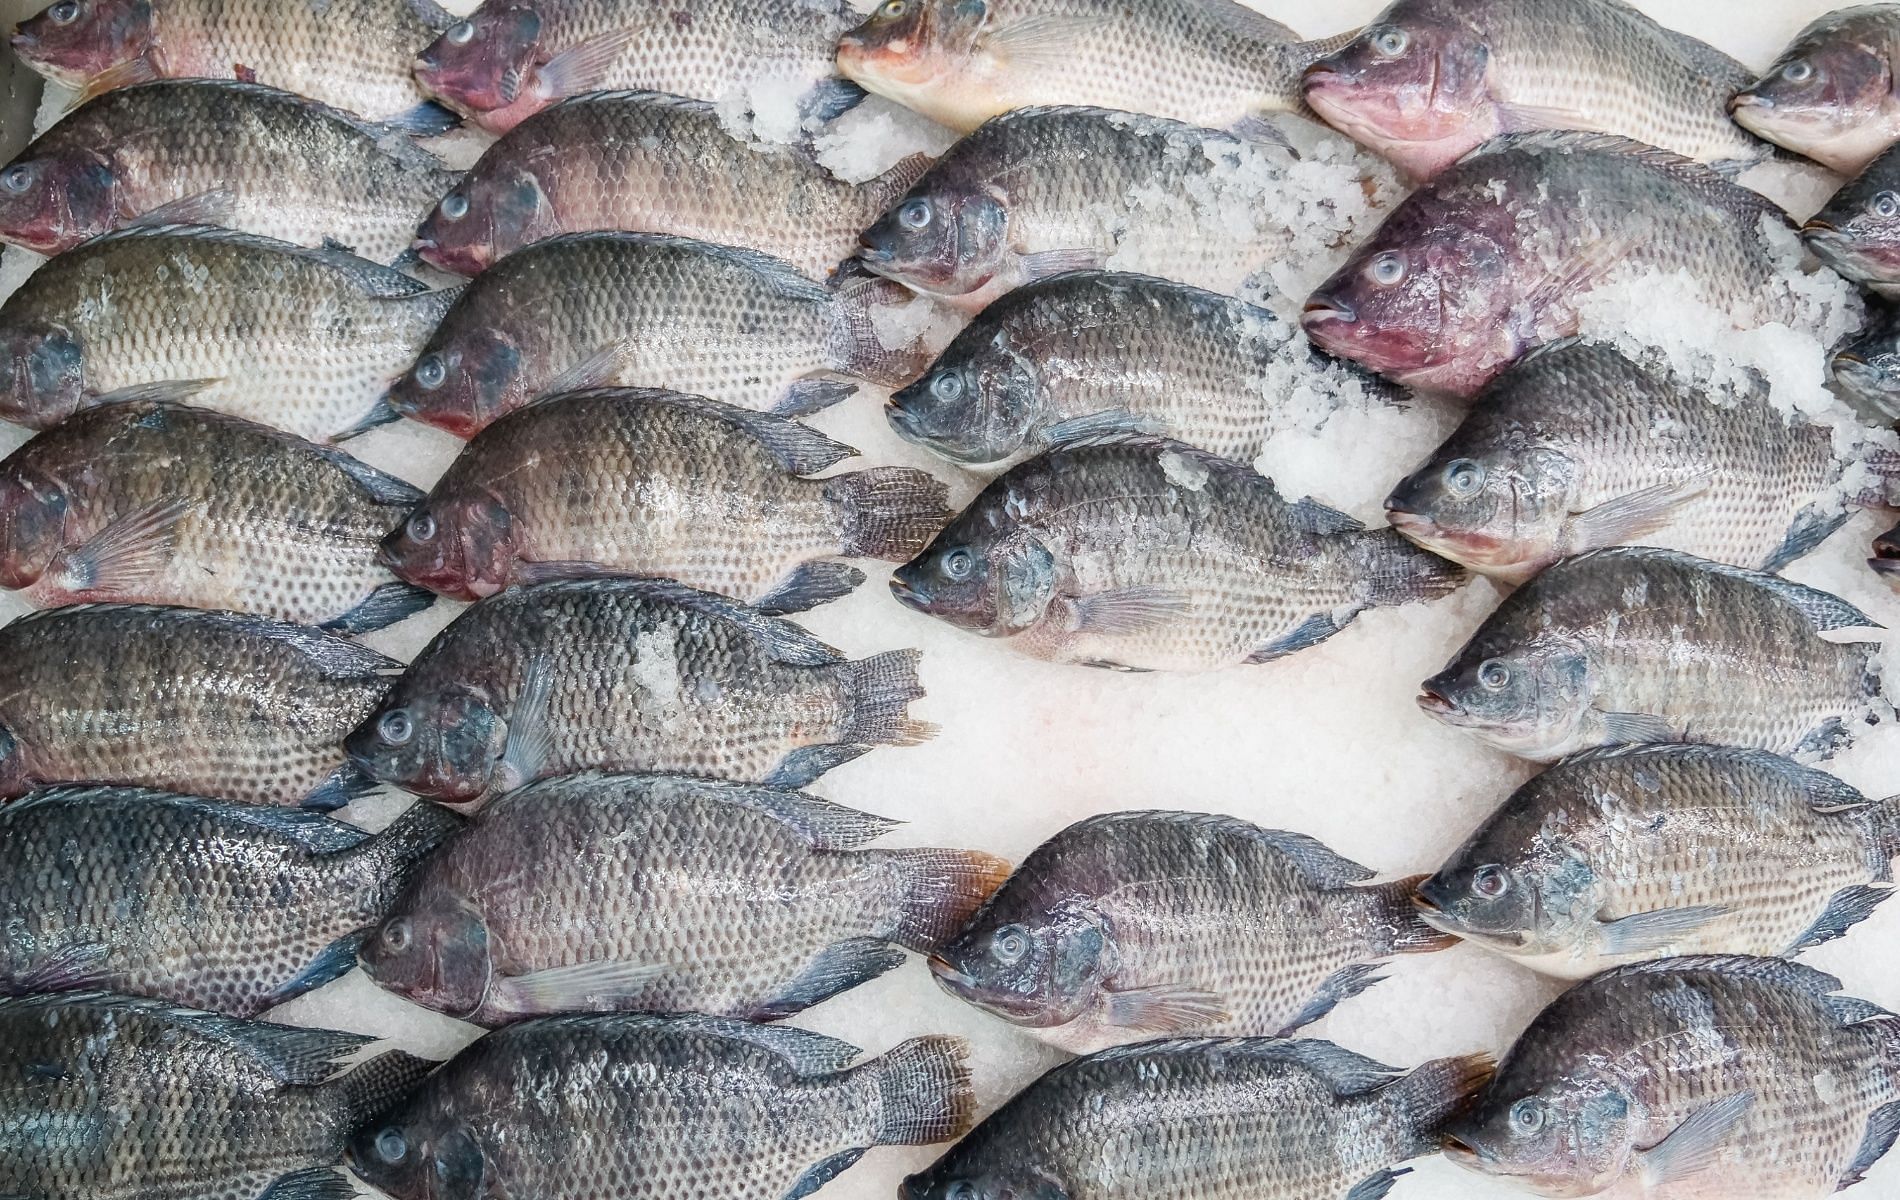 The Tilapia is a popularly consumed fish that is a rich source of phosphorous (Image Kindel Media via Pexels)